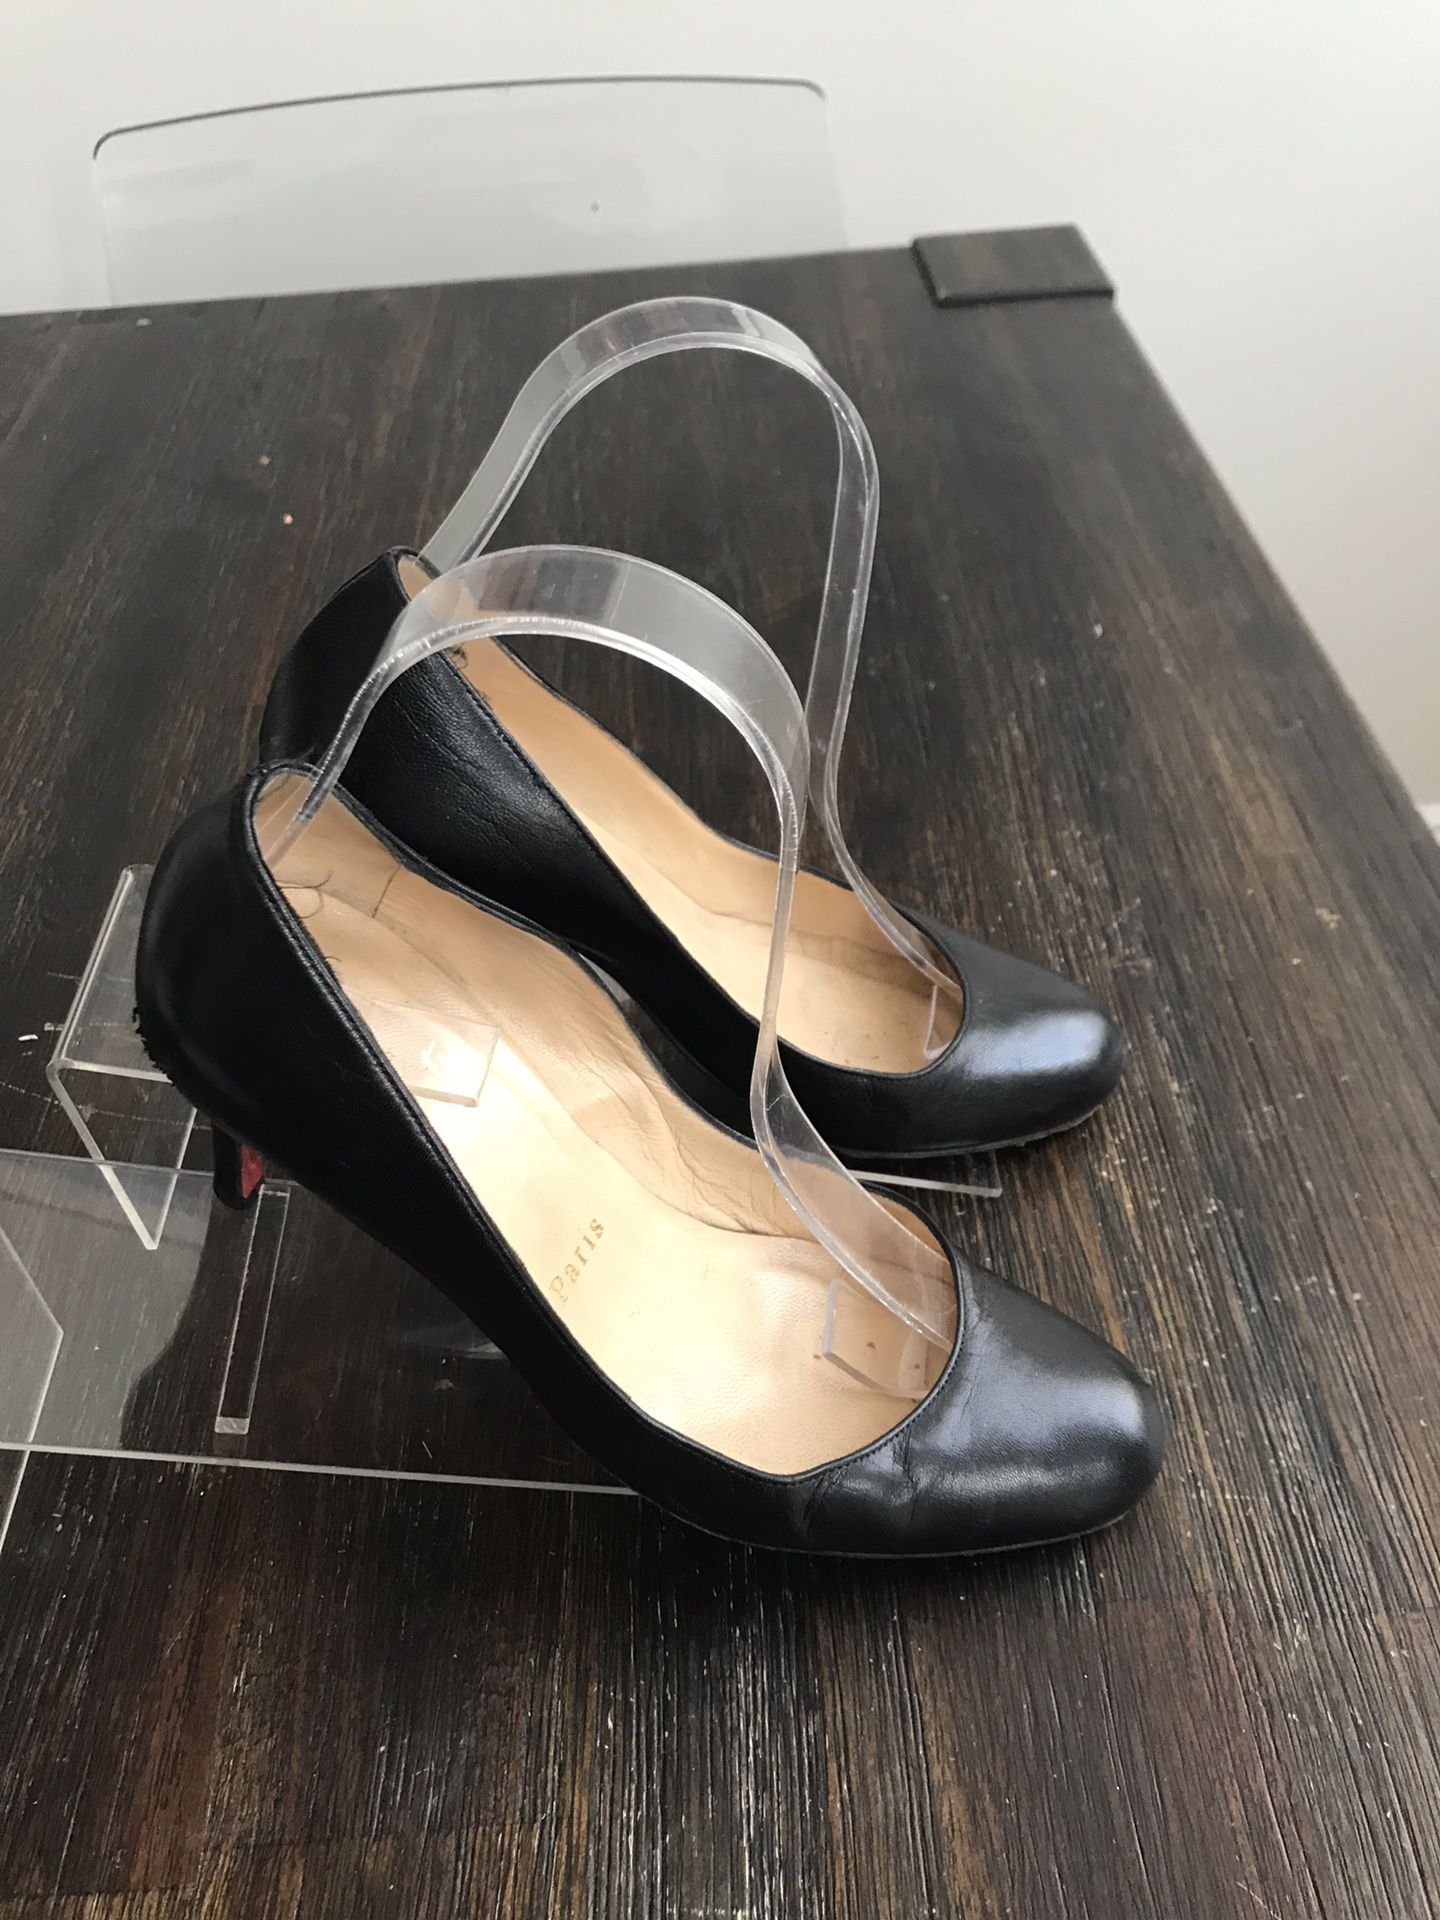 Christian Louboutin Black Heels Red Bottoms Size 37. Condition is Pre-owned. See pictures ask questions and make an offer!